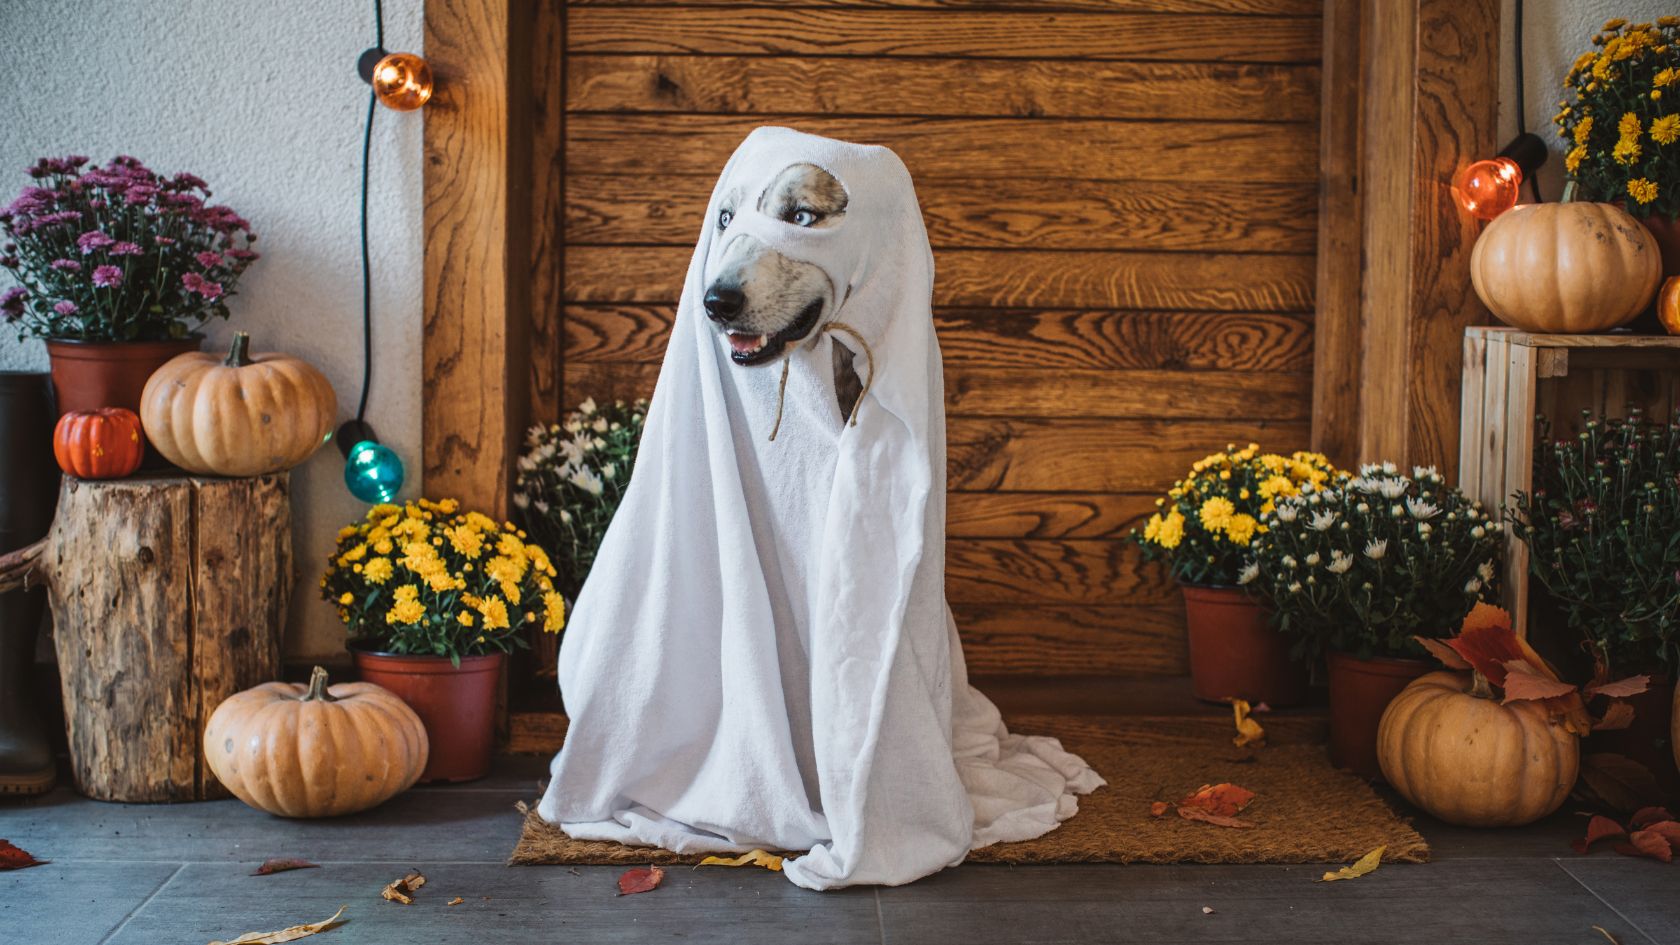 Mills 50 Halloween event featuring dog costume contest